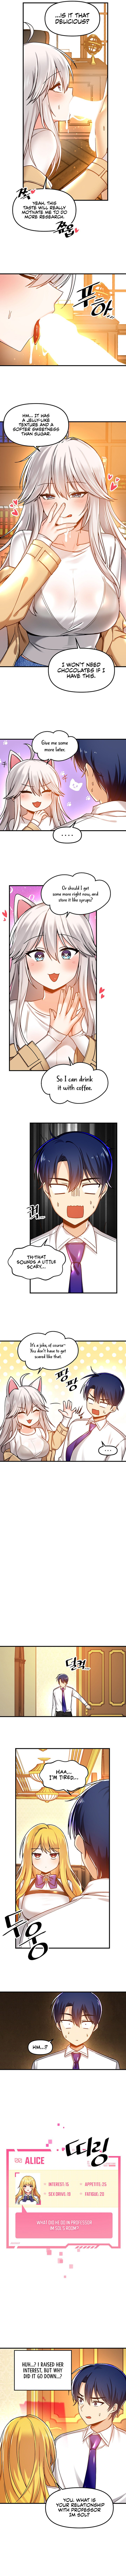 trapped-in-the-academys-eroge-chap-45-5